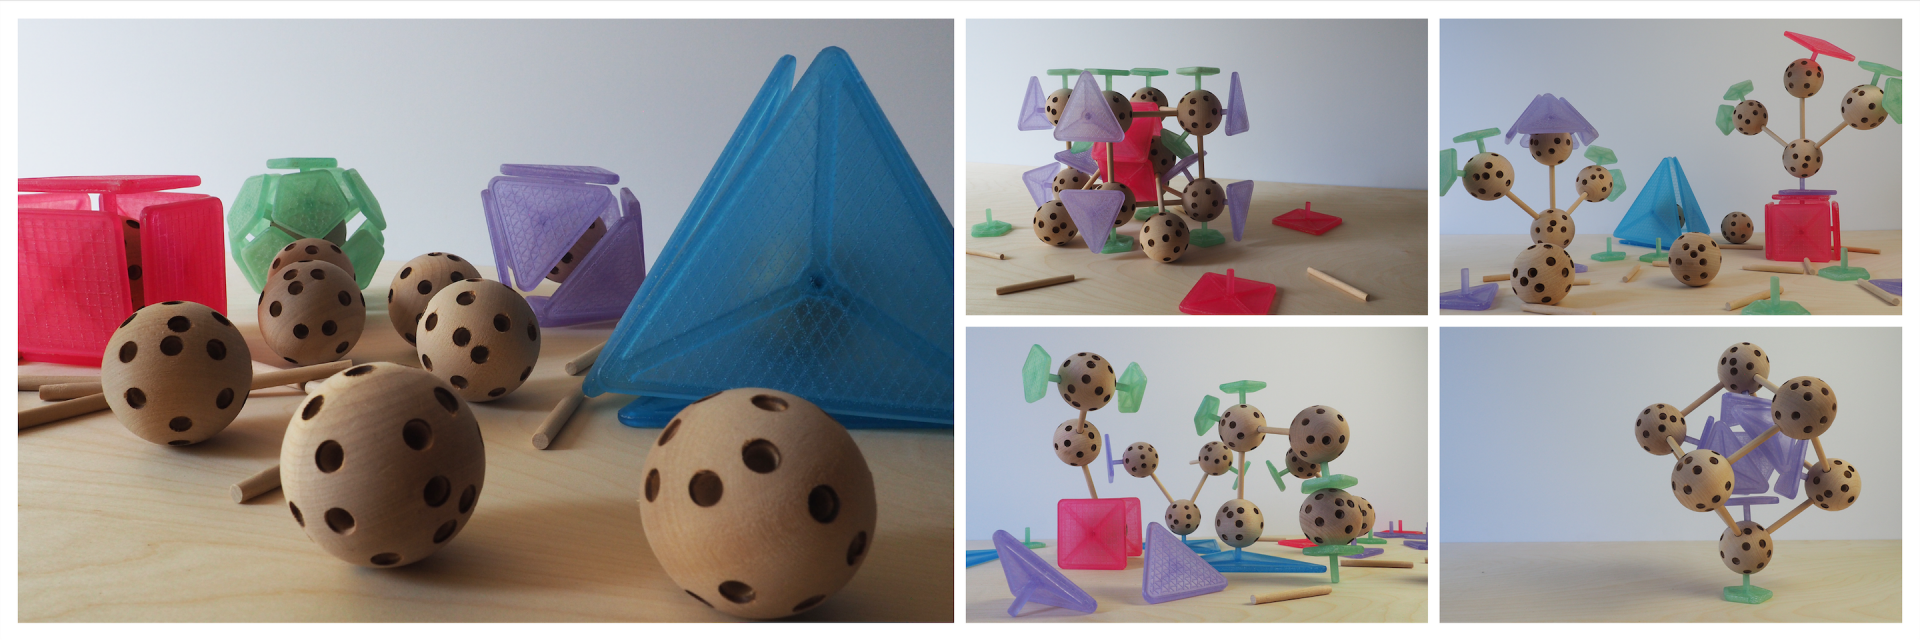 Several images of a simple geometric toy set. 